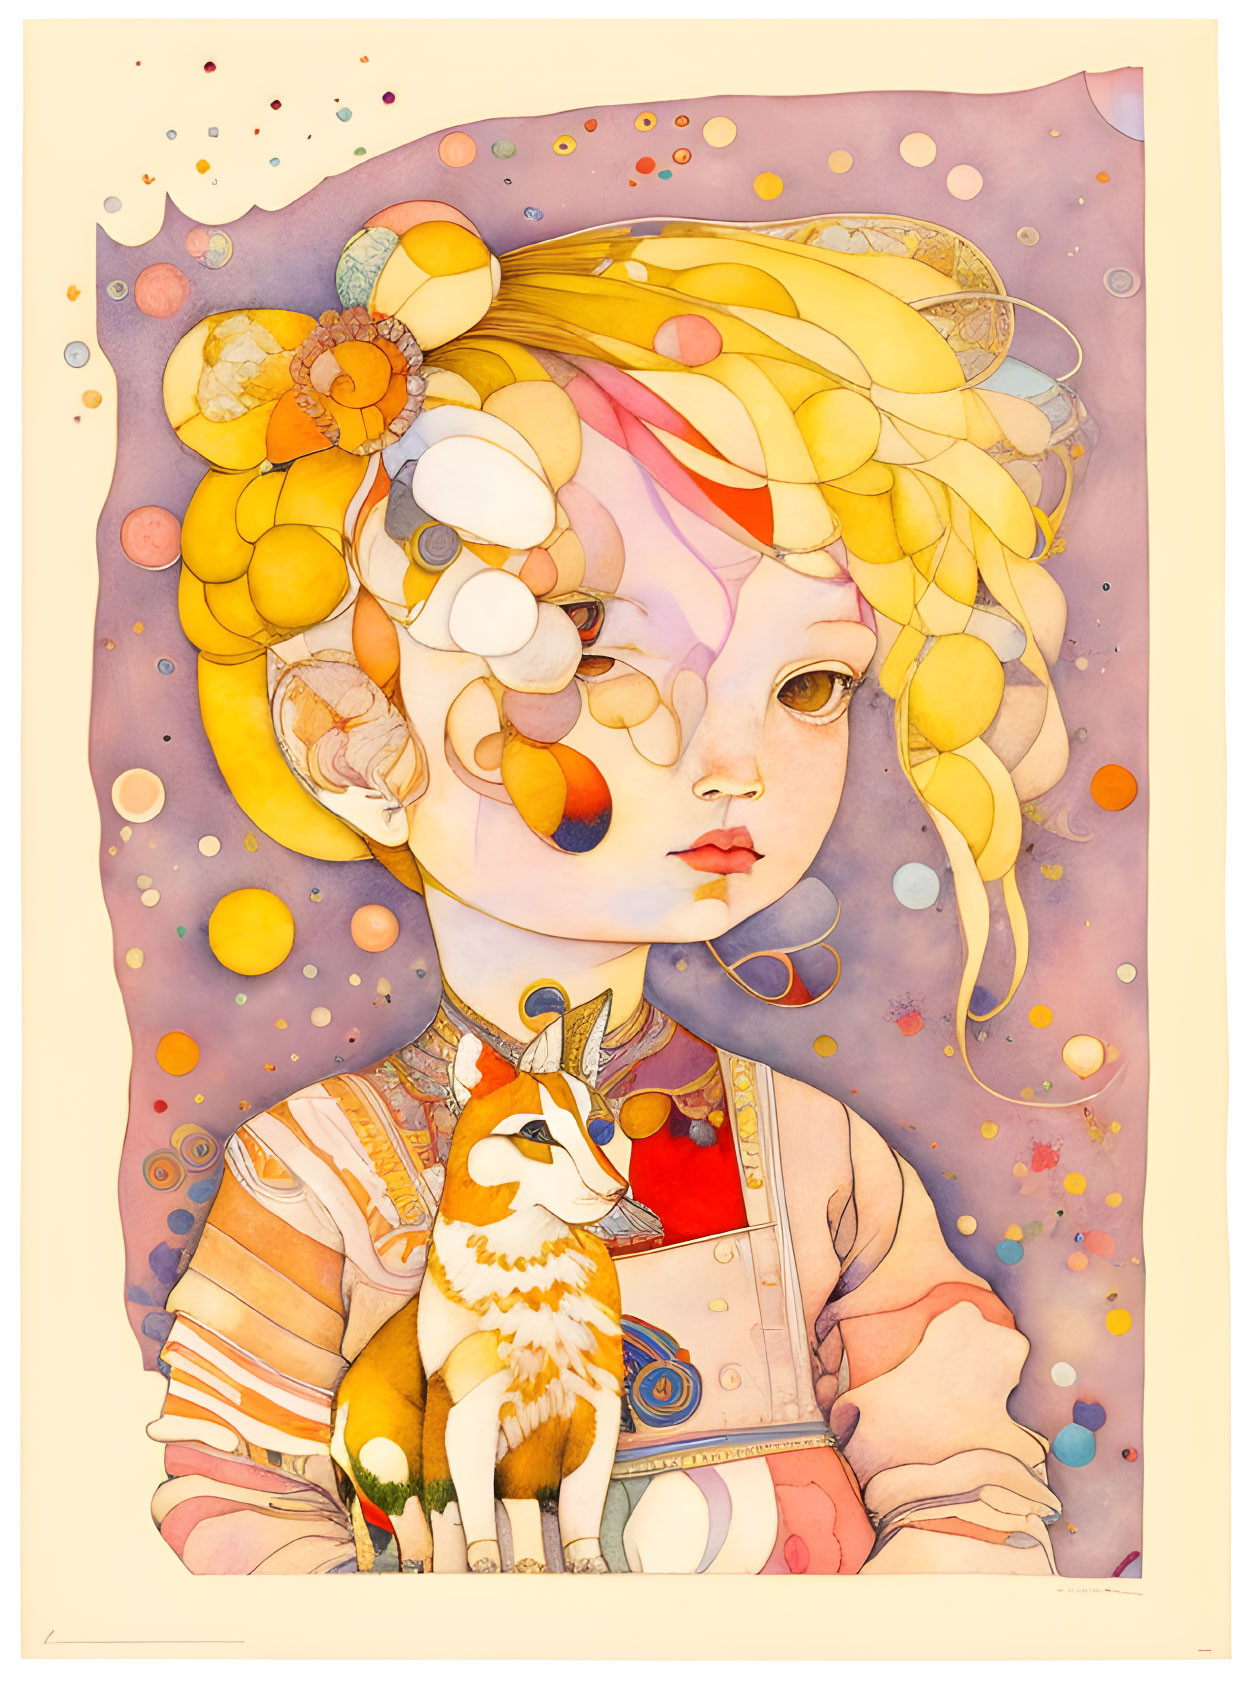 Colorful girl with floral hair and fox creature in whimsical illustration